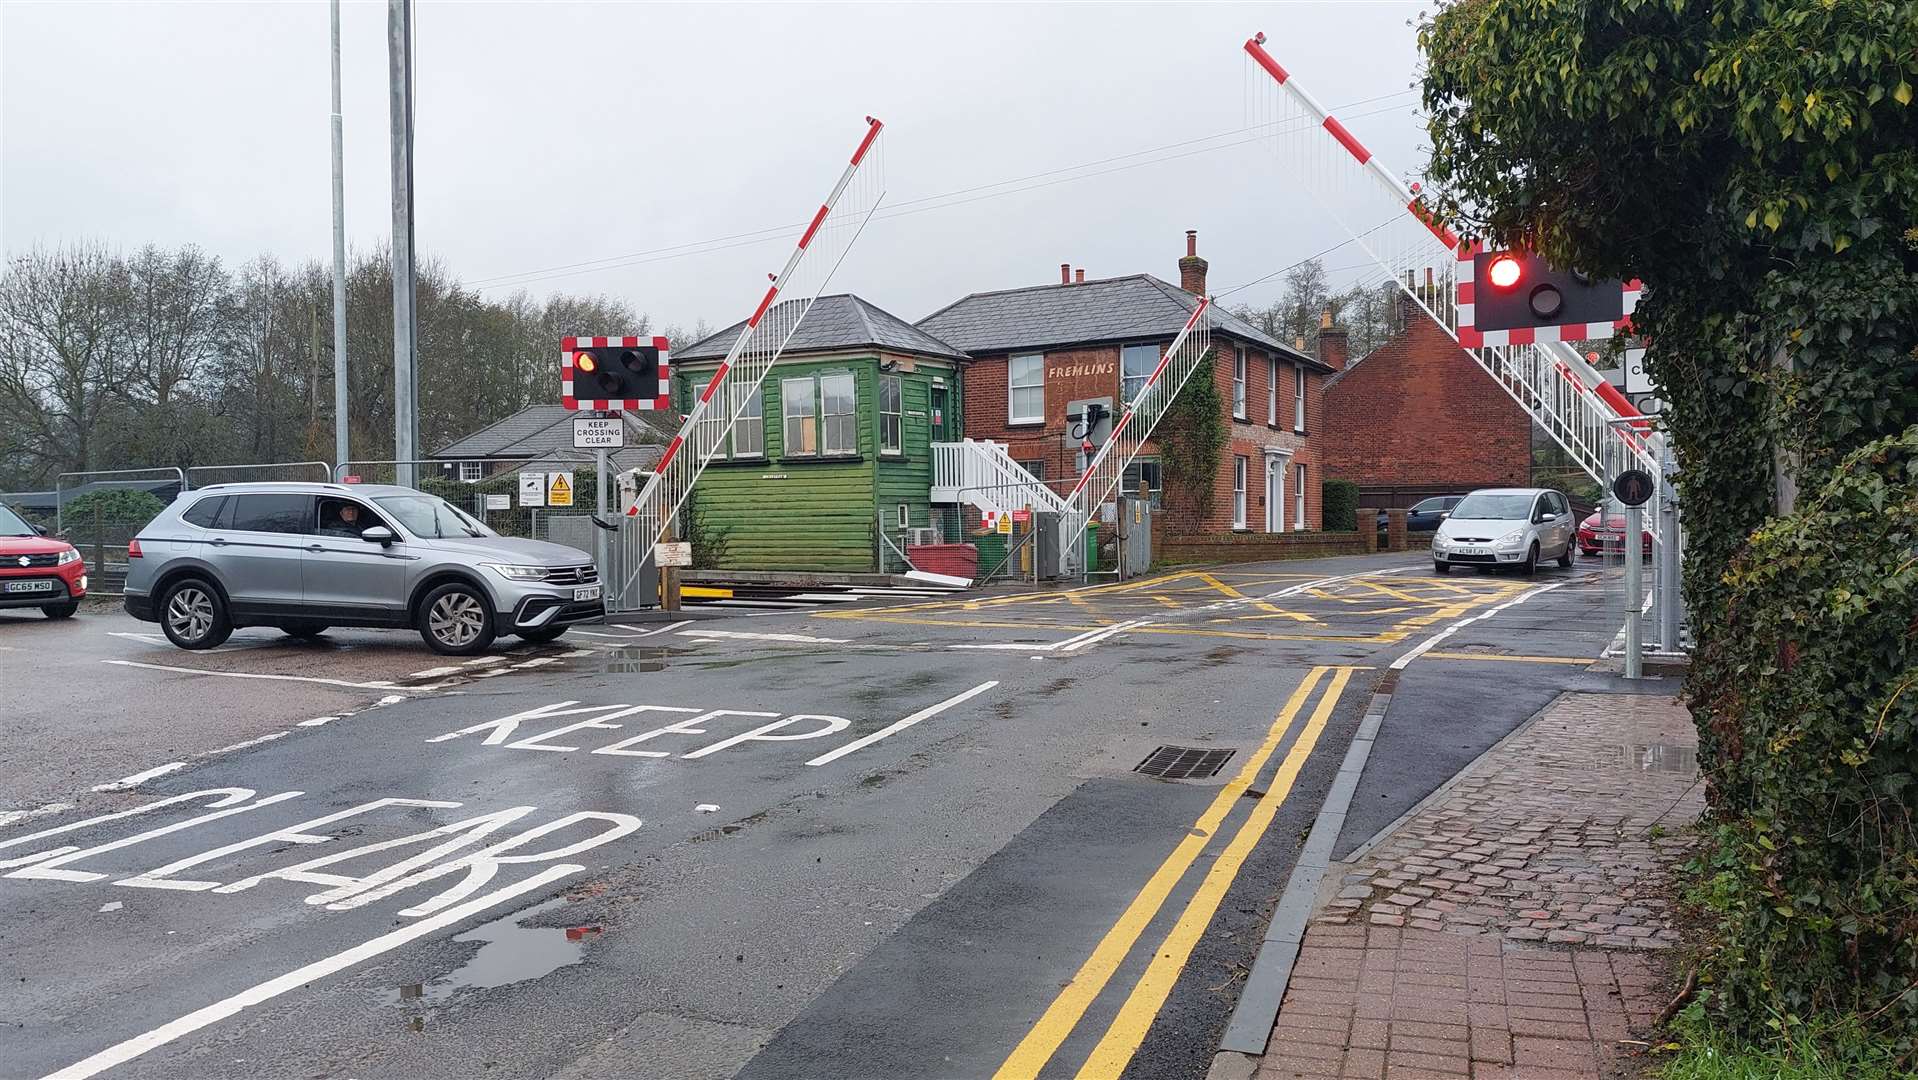 Residents say the crossing in Chartham is now much quicker